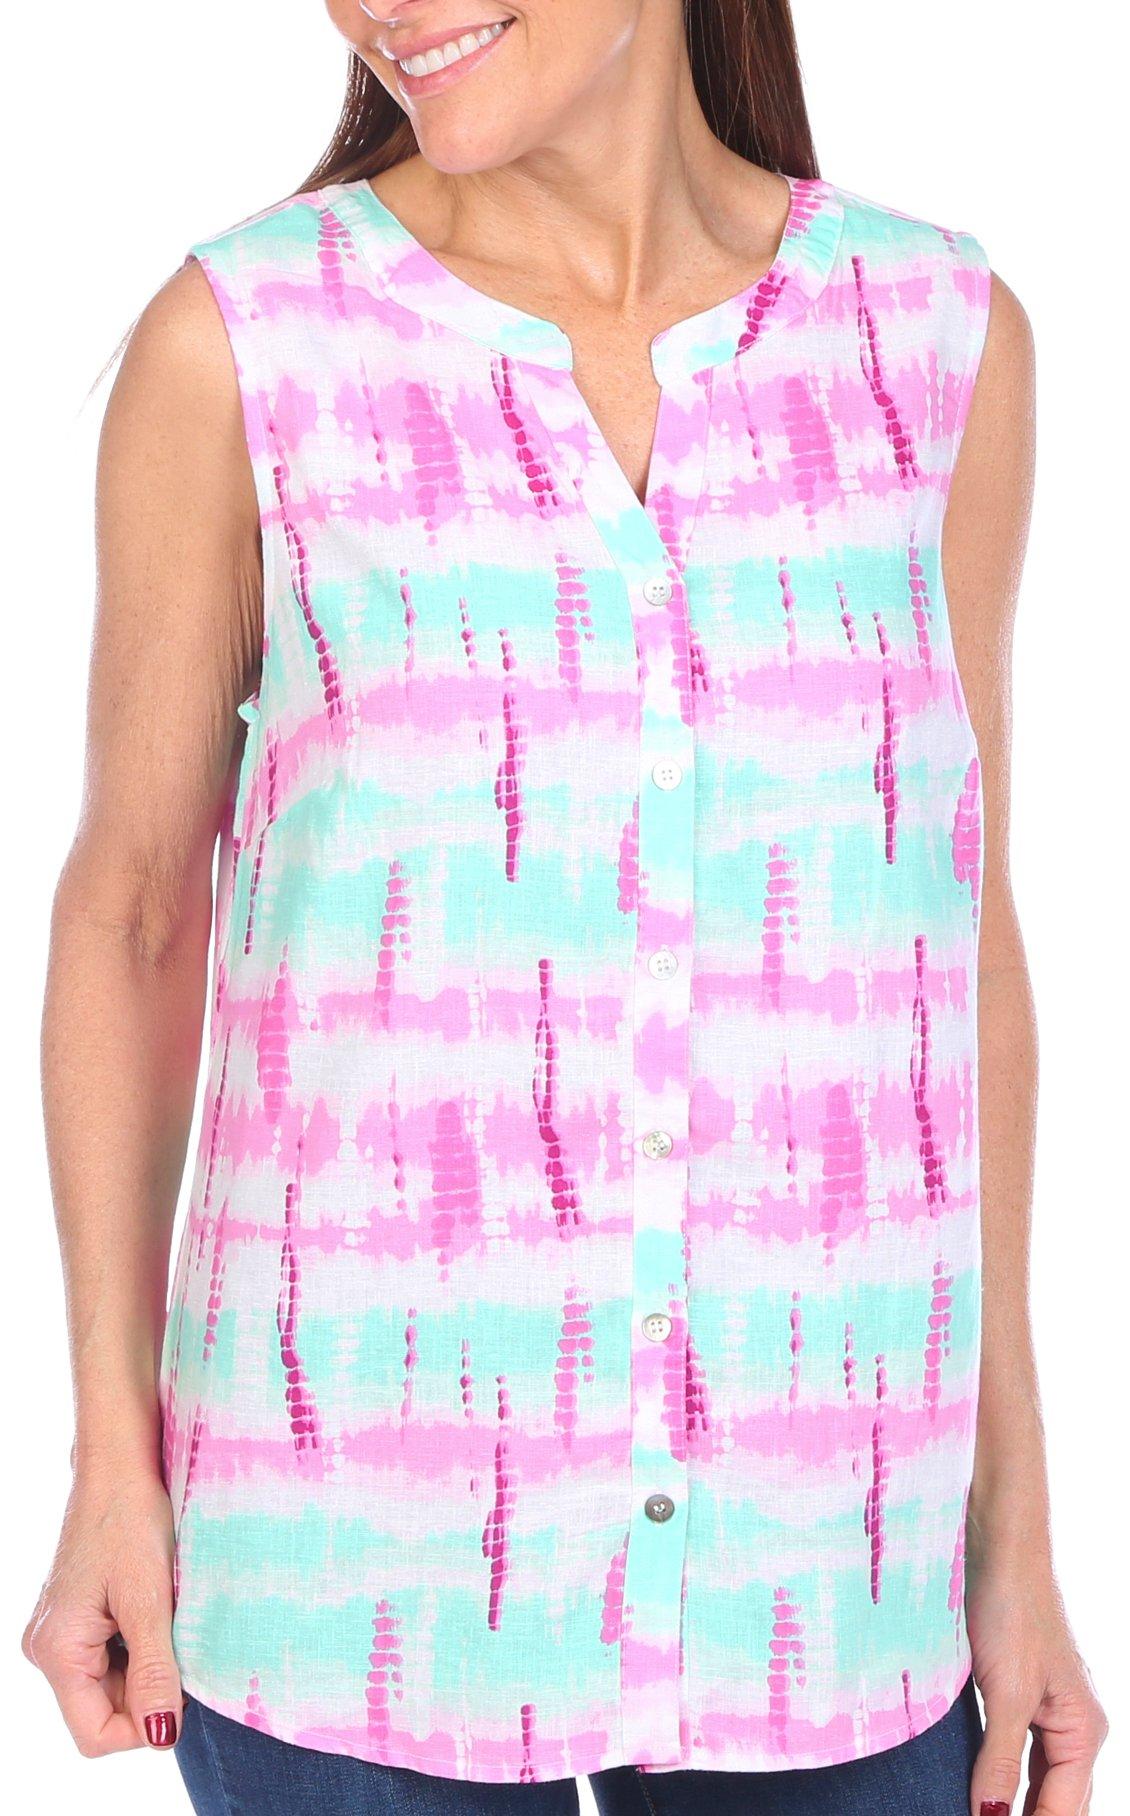 Coral Bay Womens Spring Tie-Dye Button Down Sleeveless Top